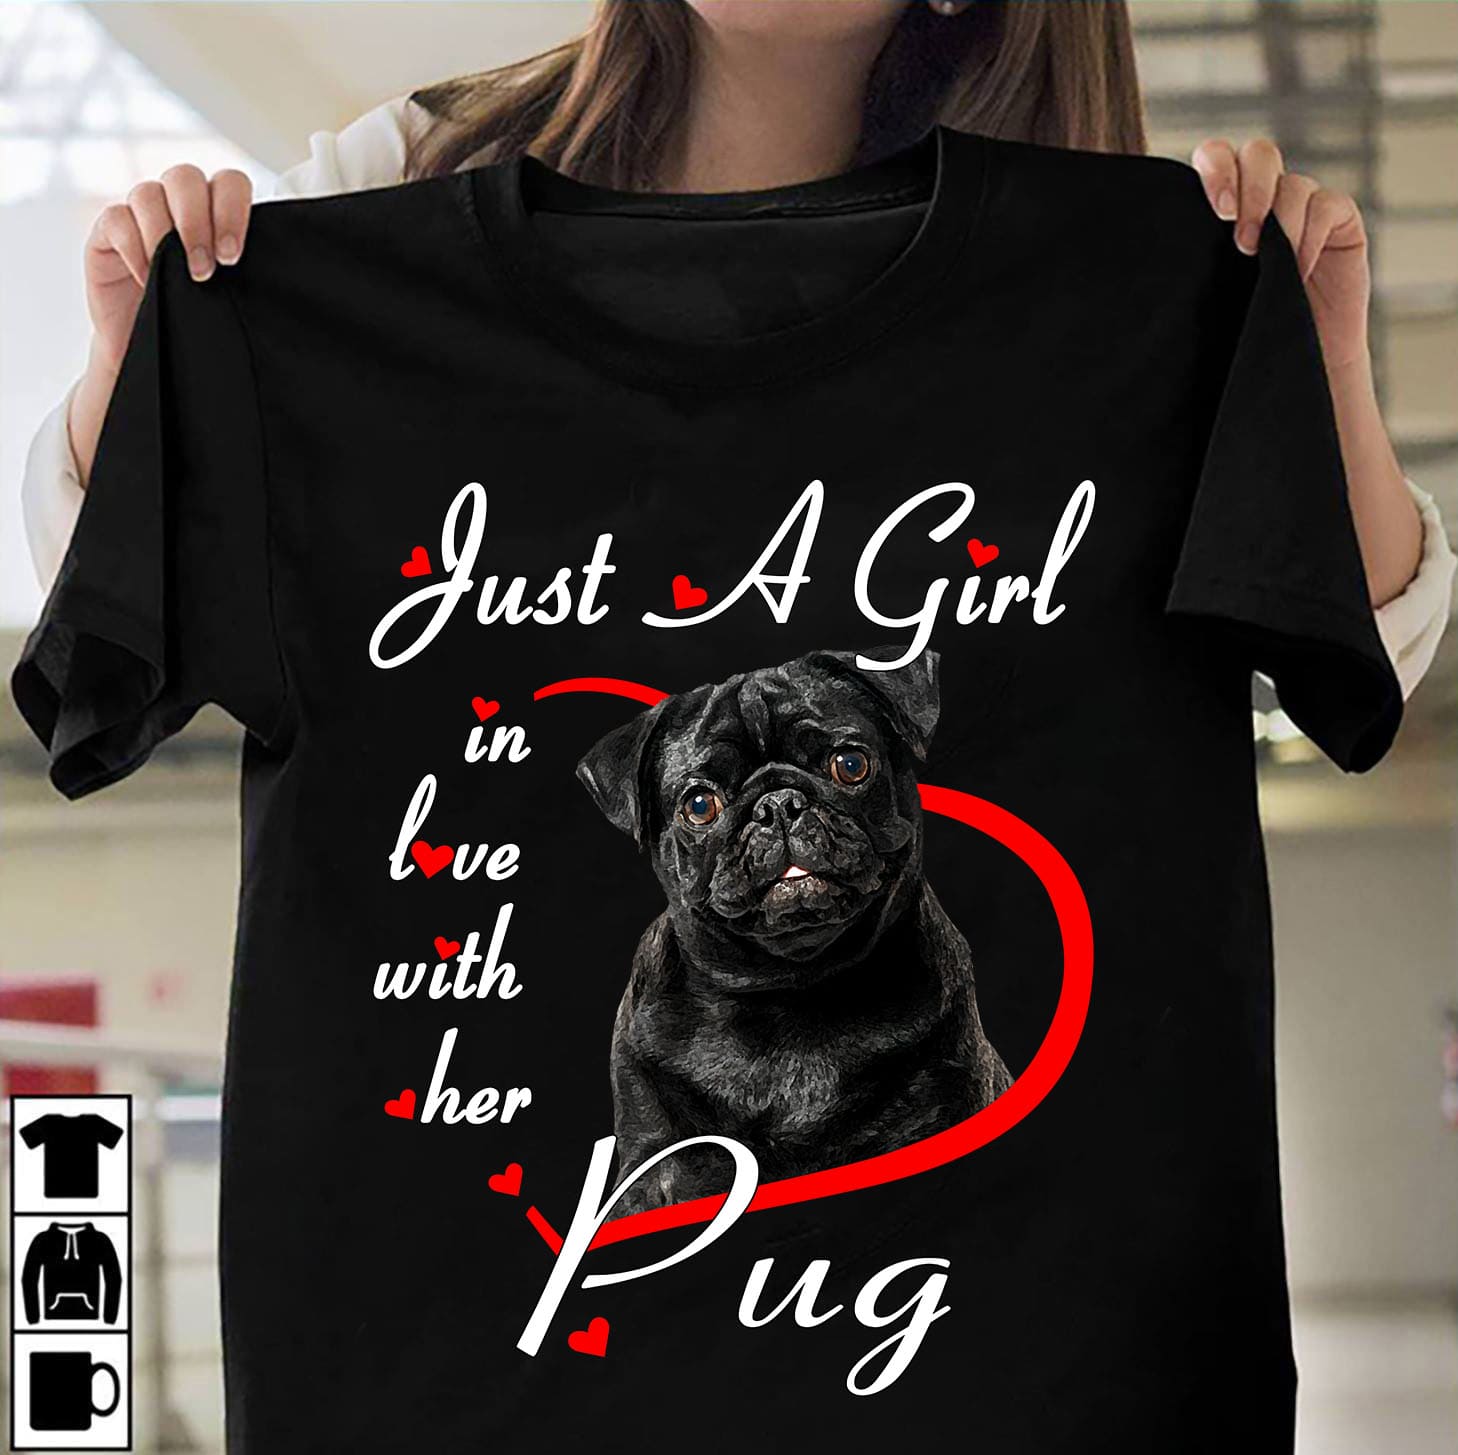 Just a girl in love with her pug - Gift for dog lover, girl loves pug dog